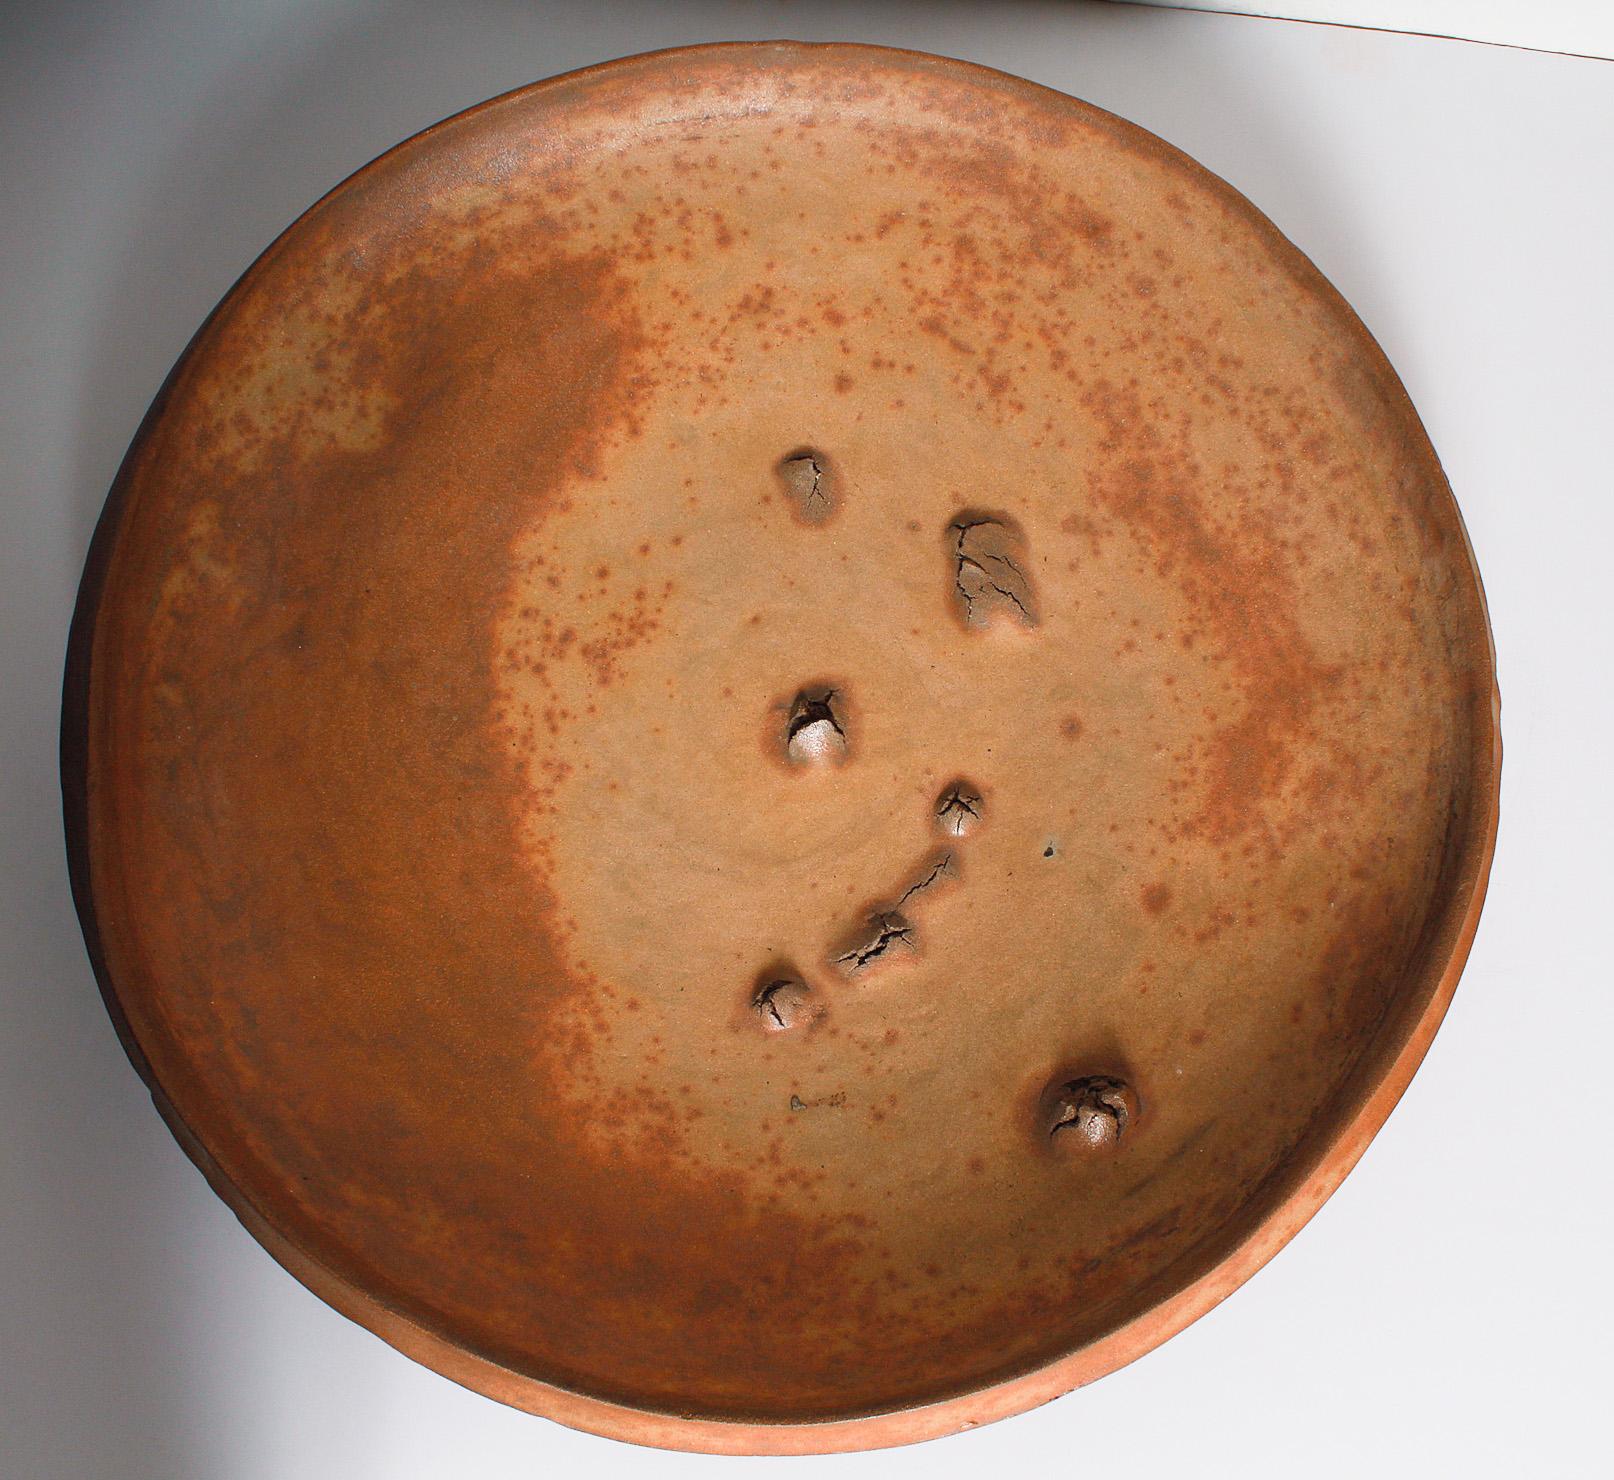 Wood fired stoneware charger by Peter Voulkos (American, 1924-2002). 
Signed and dated: [VOULKOS 78].